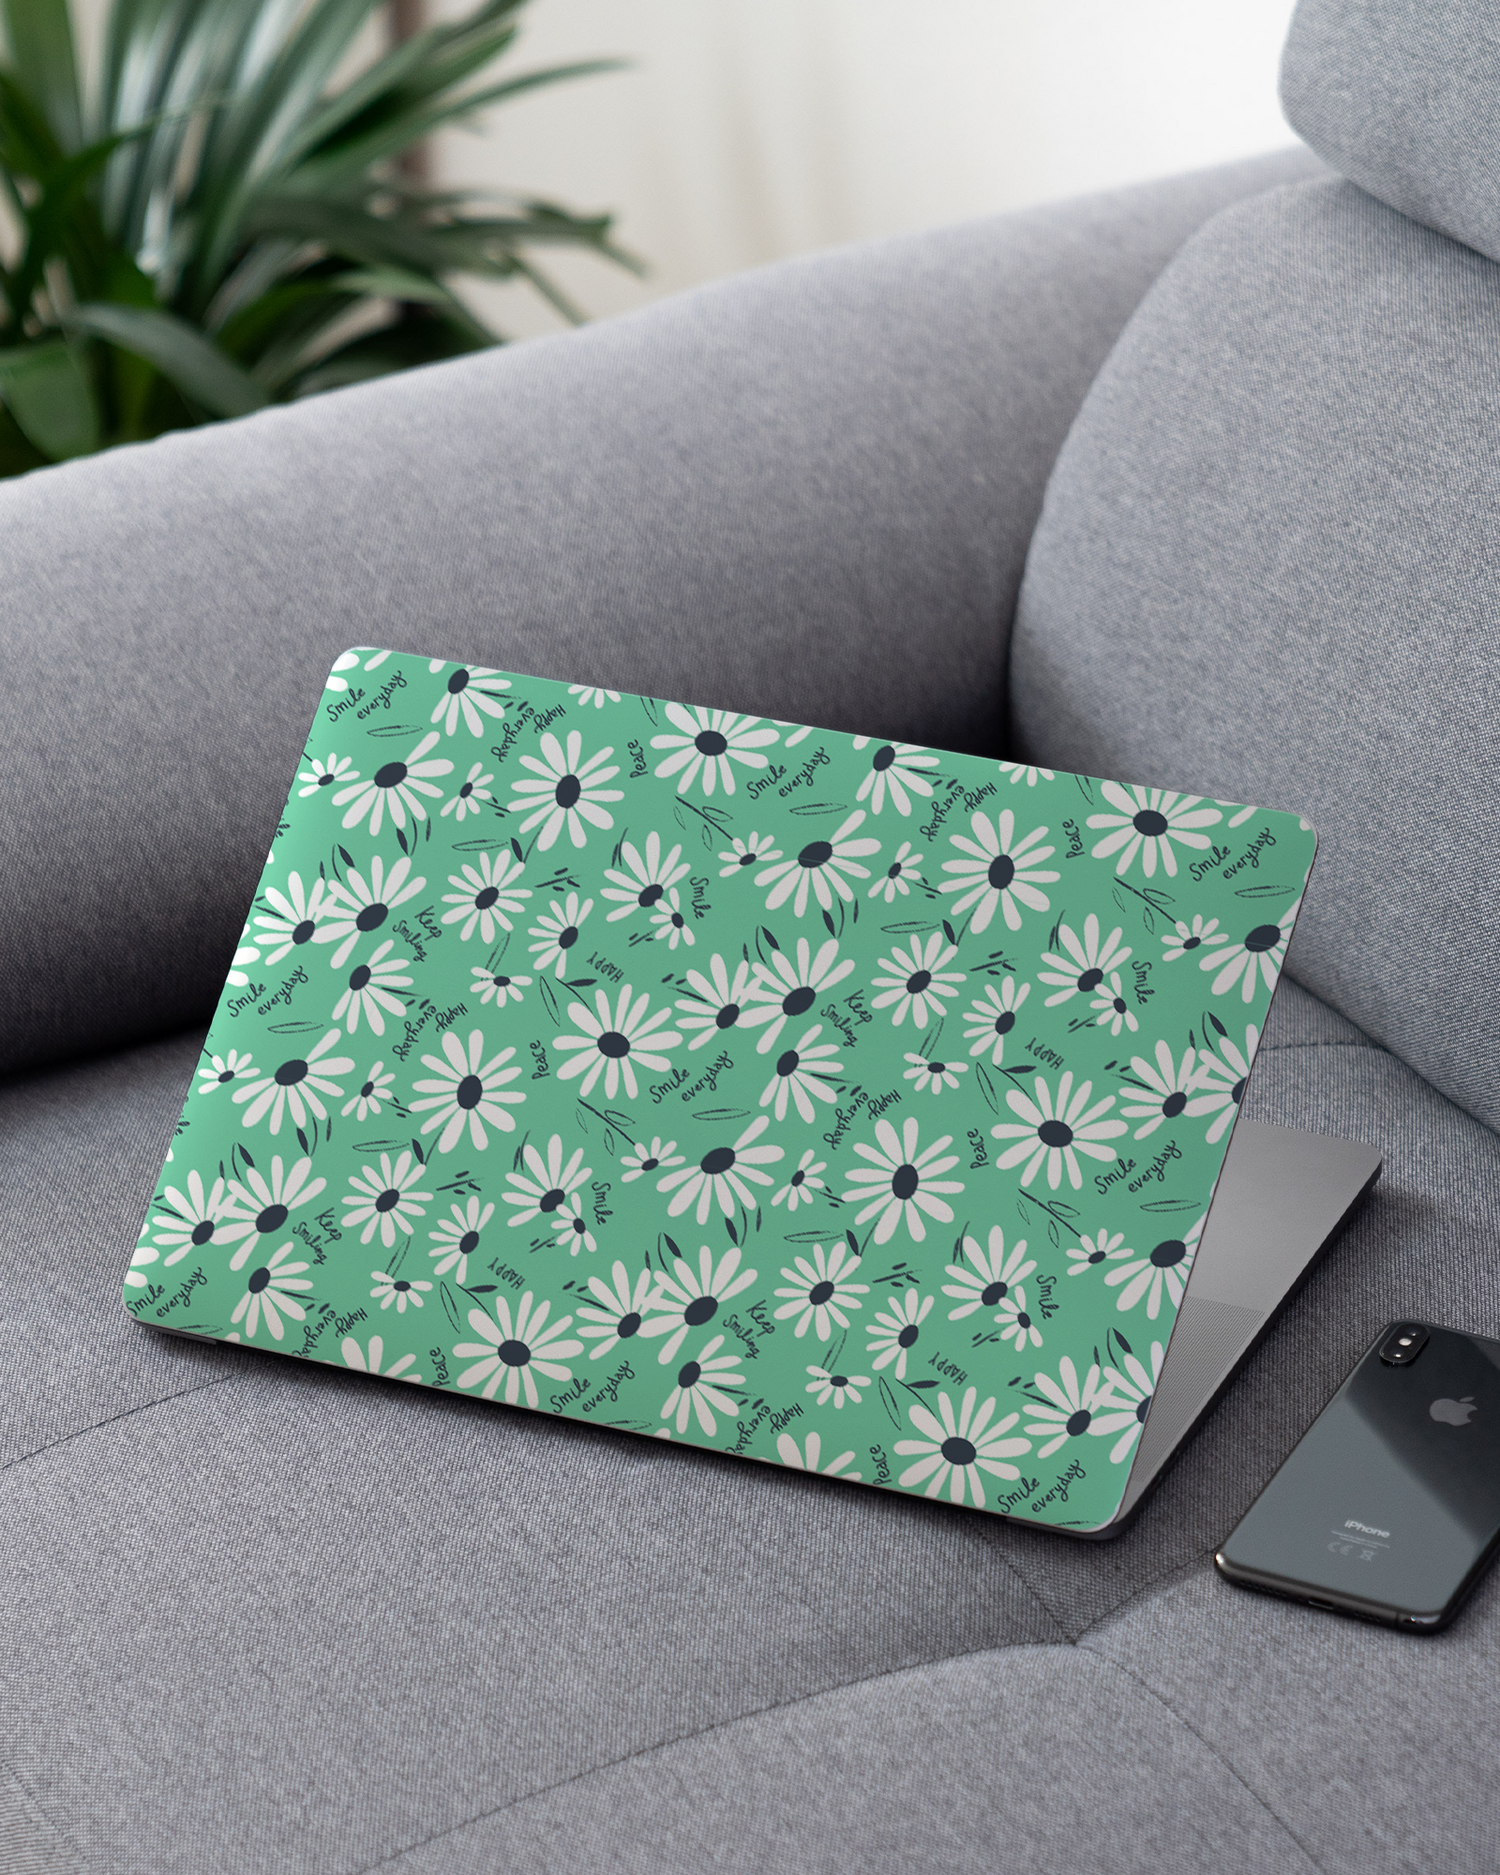 Positive Daisies Laptop Skin for 13 inch Apple MacBooks on a couch